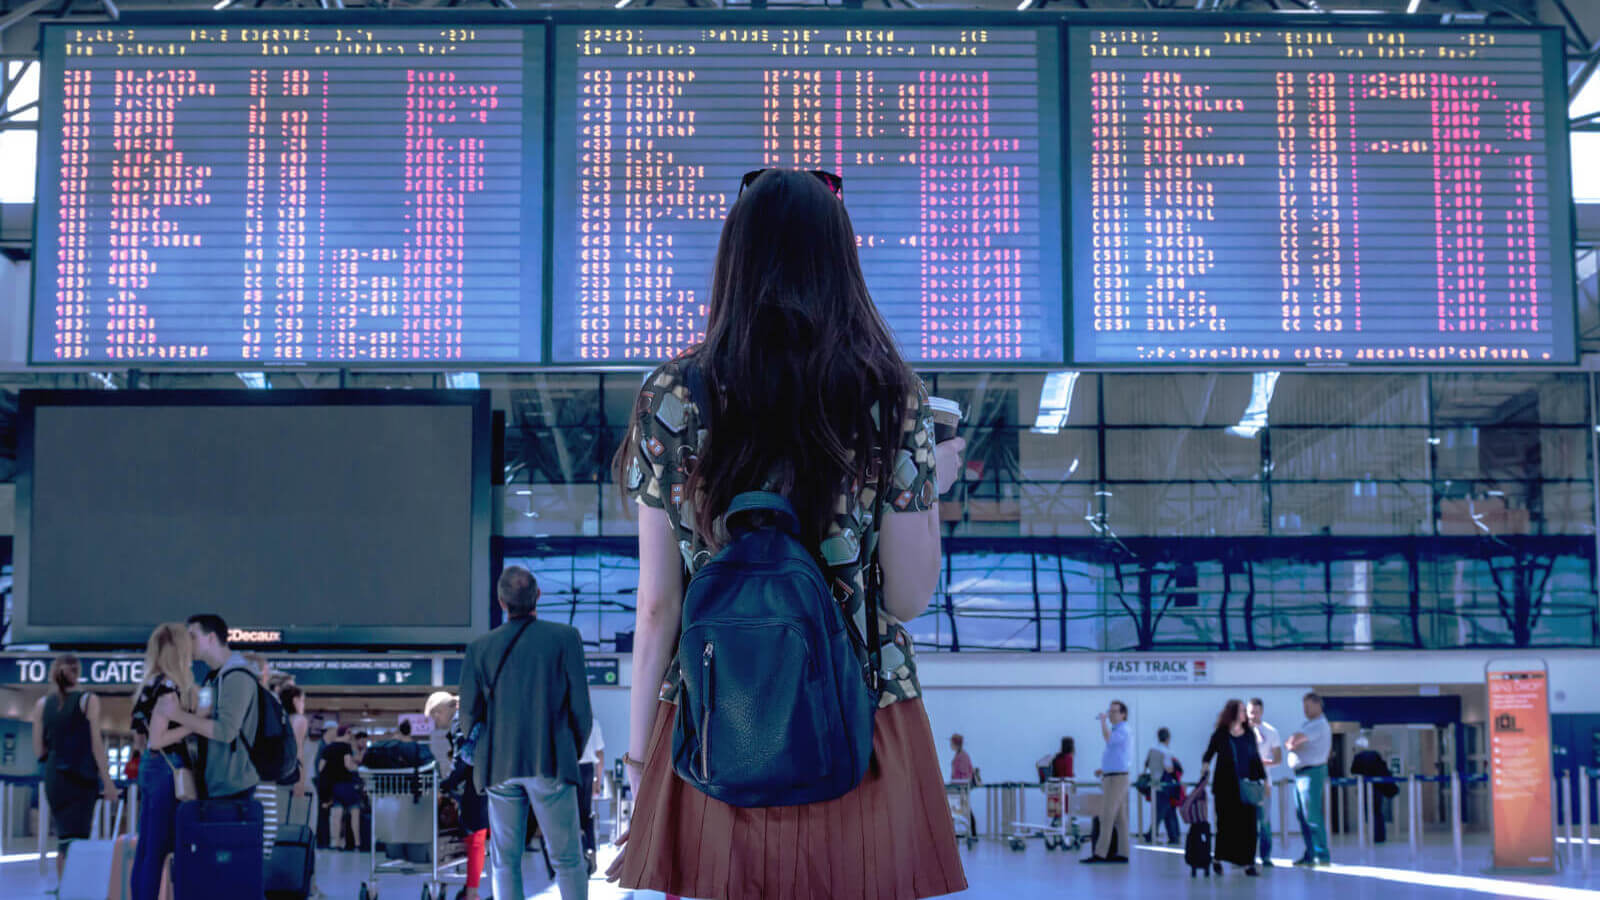 a young woman looks up at a flight tracker board in an airport